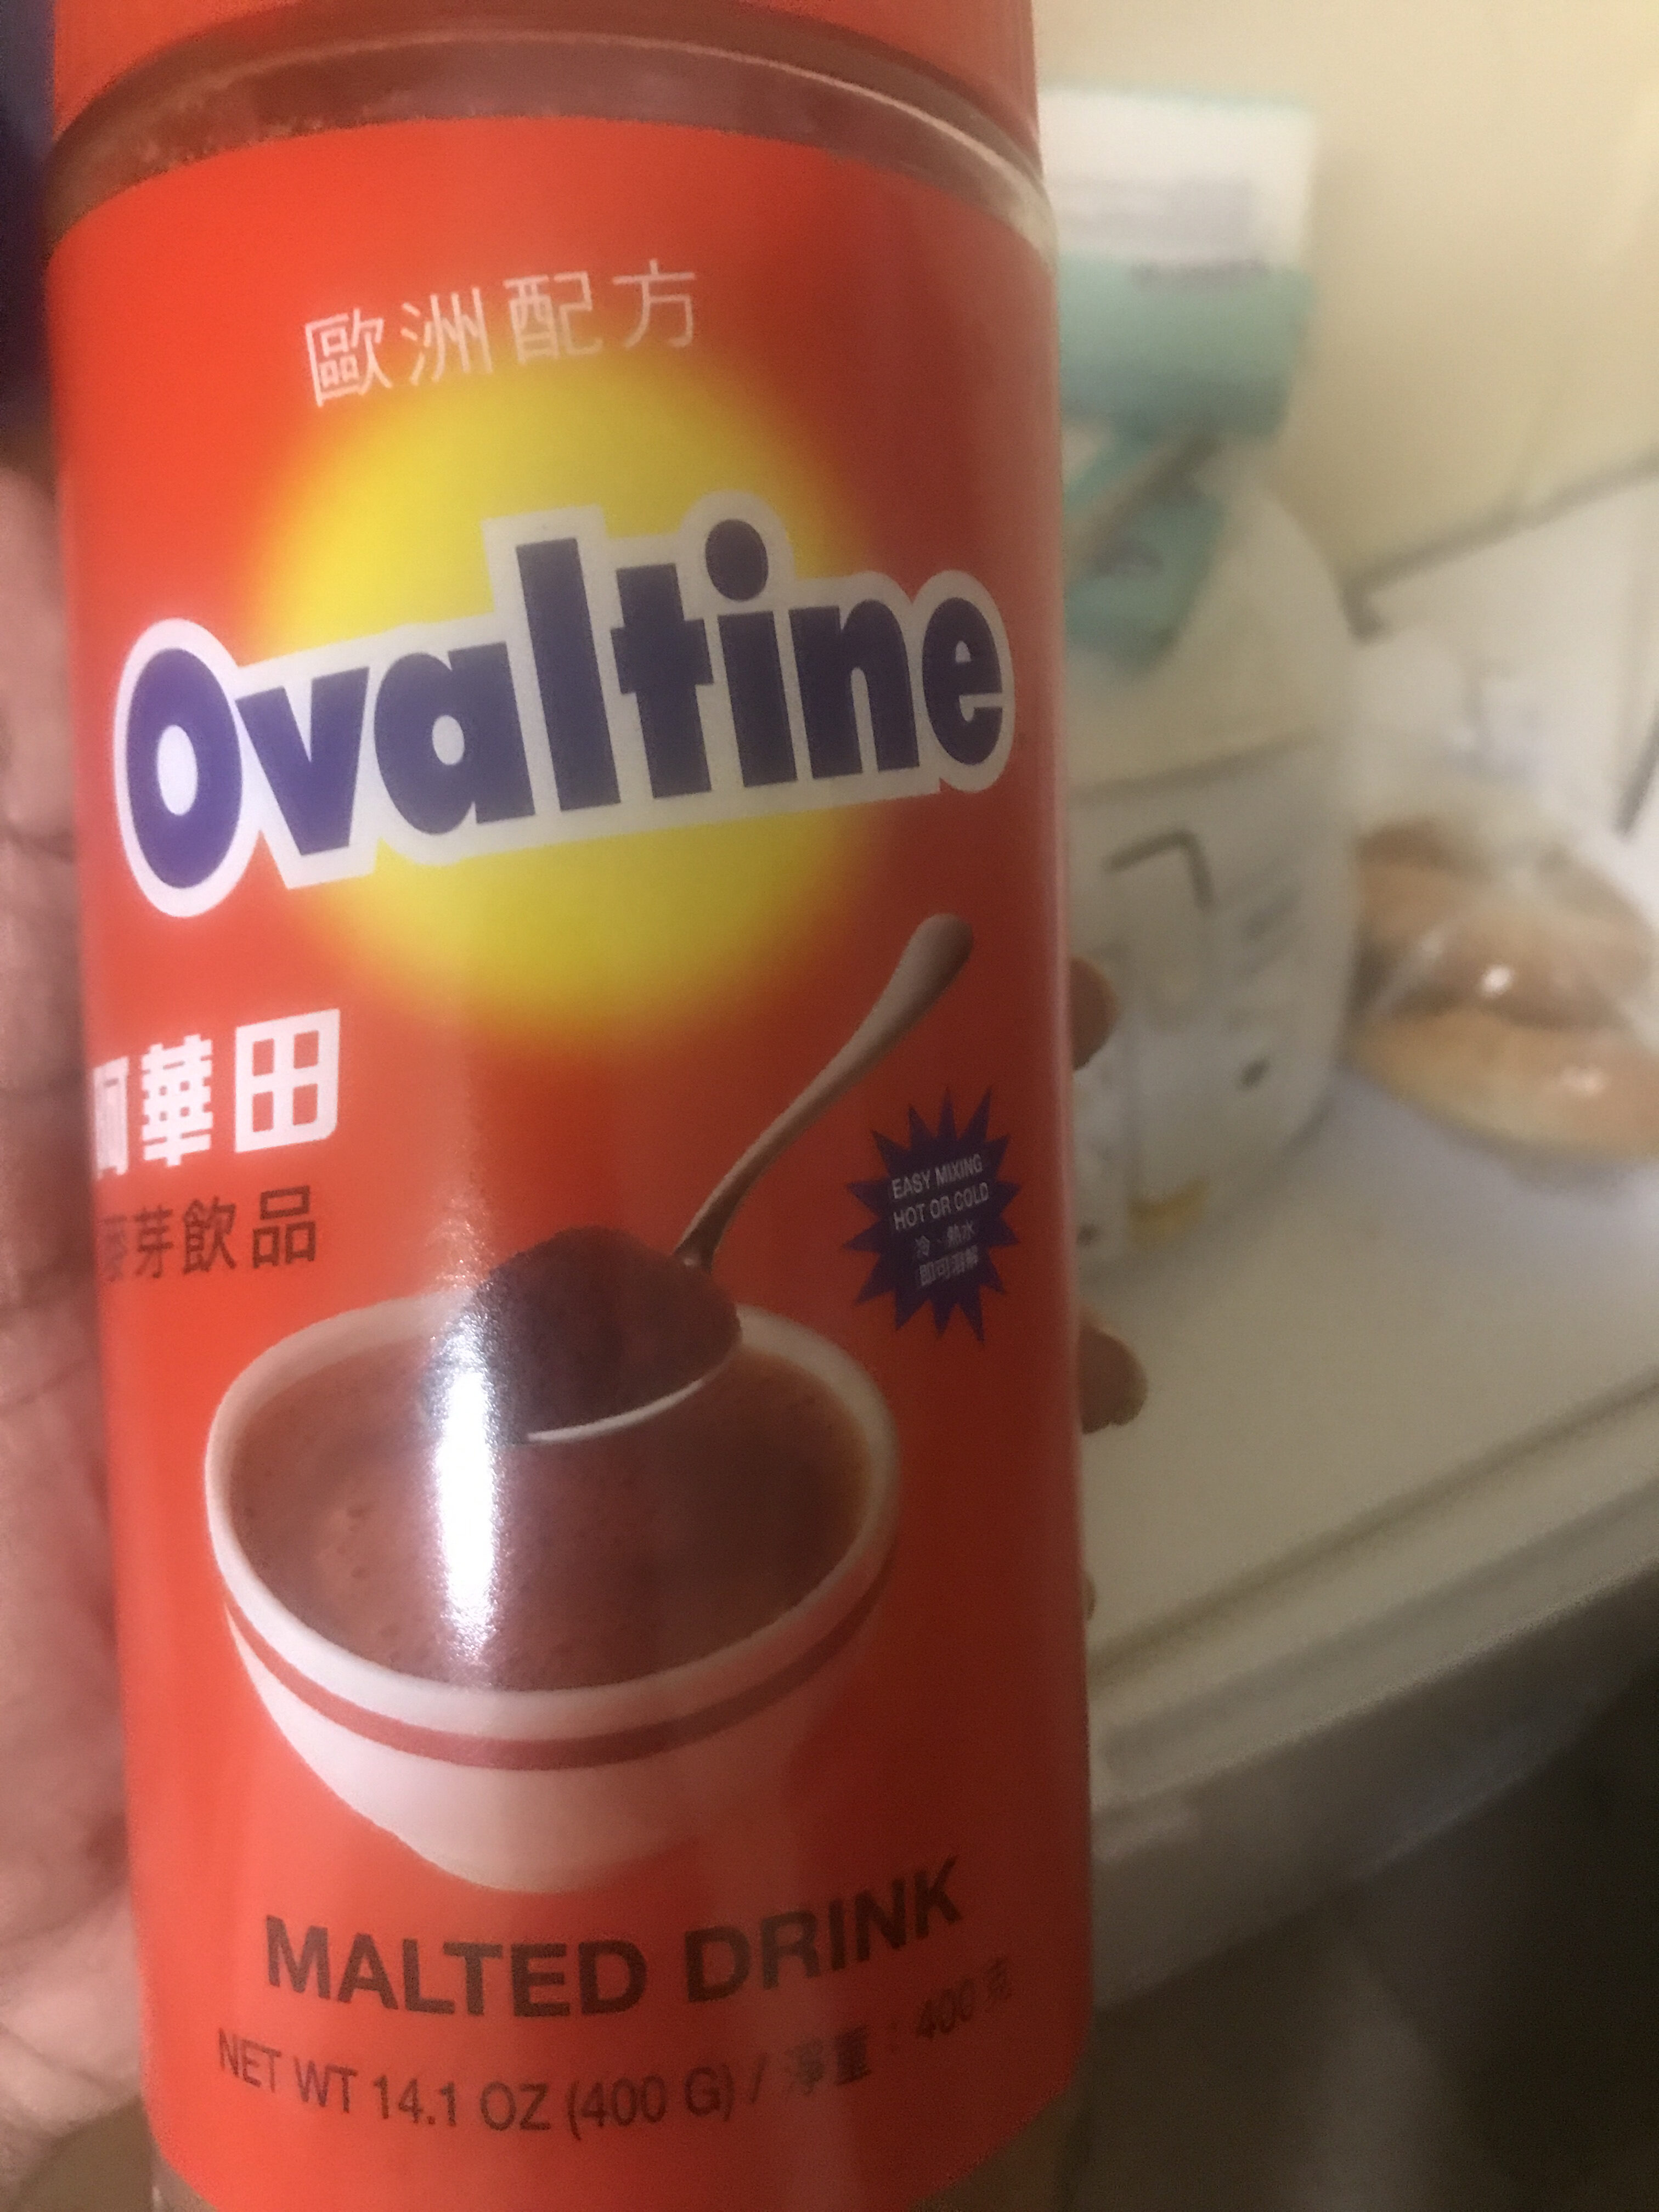 Ovaltine, malted drink - Product